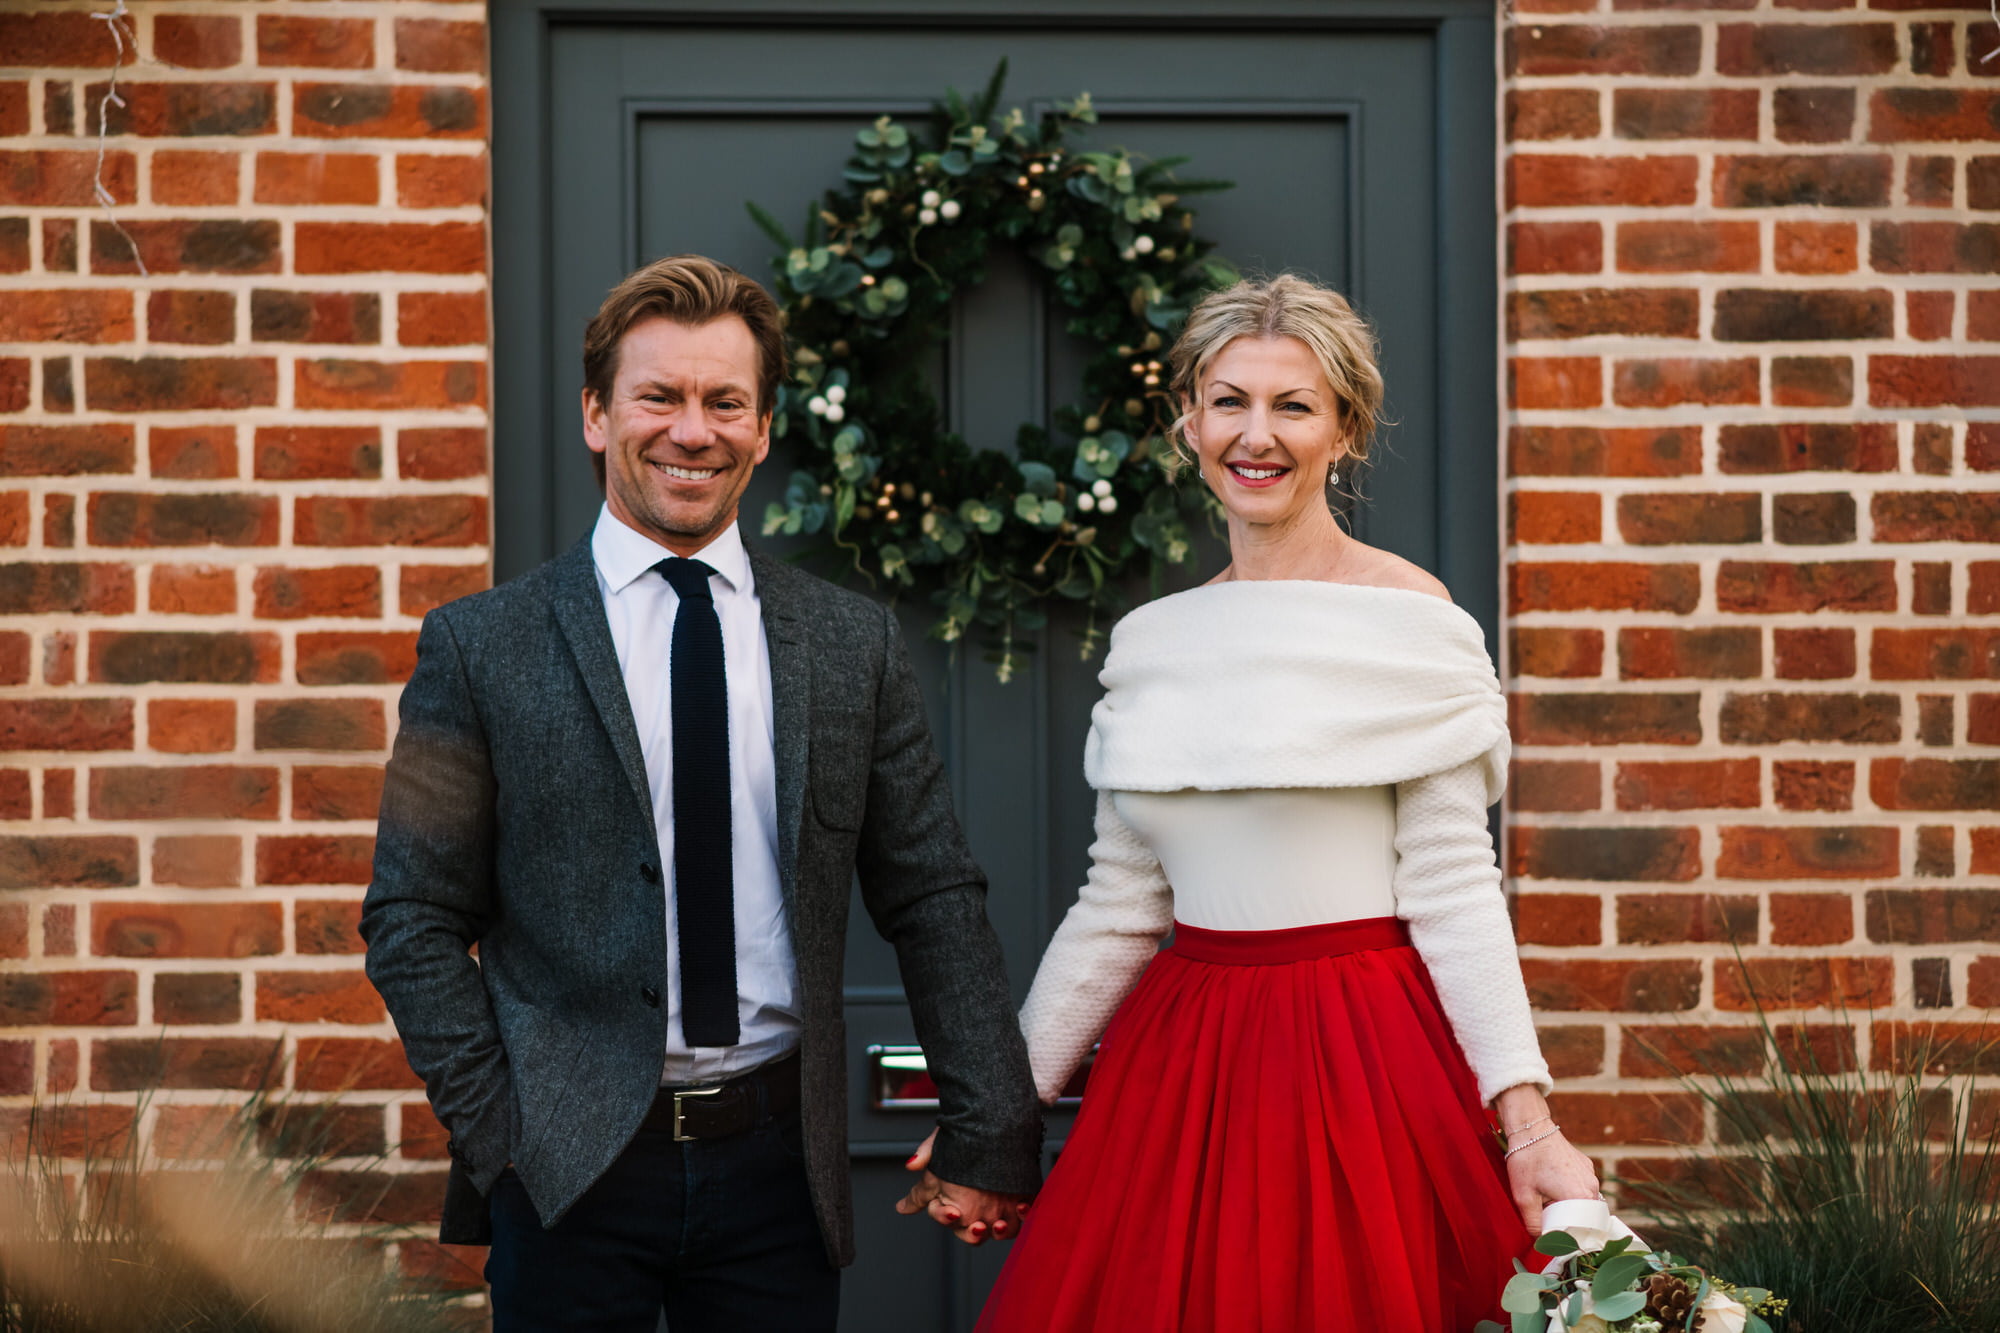 Photography at Christmas Eve Wedding in Hampshire